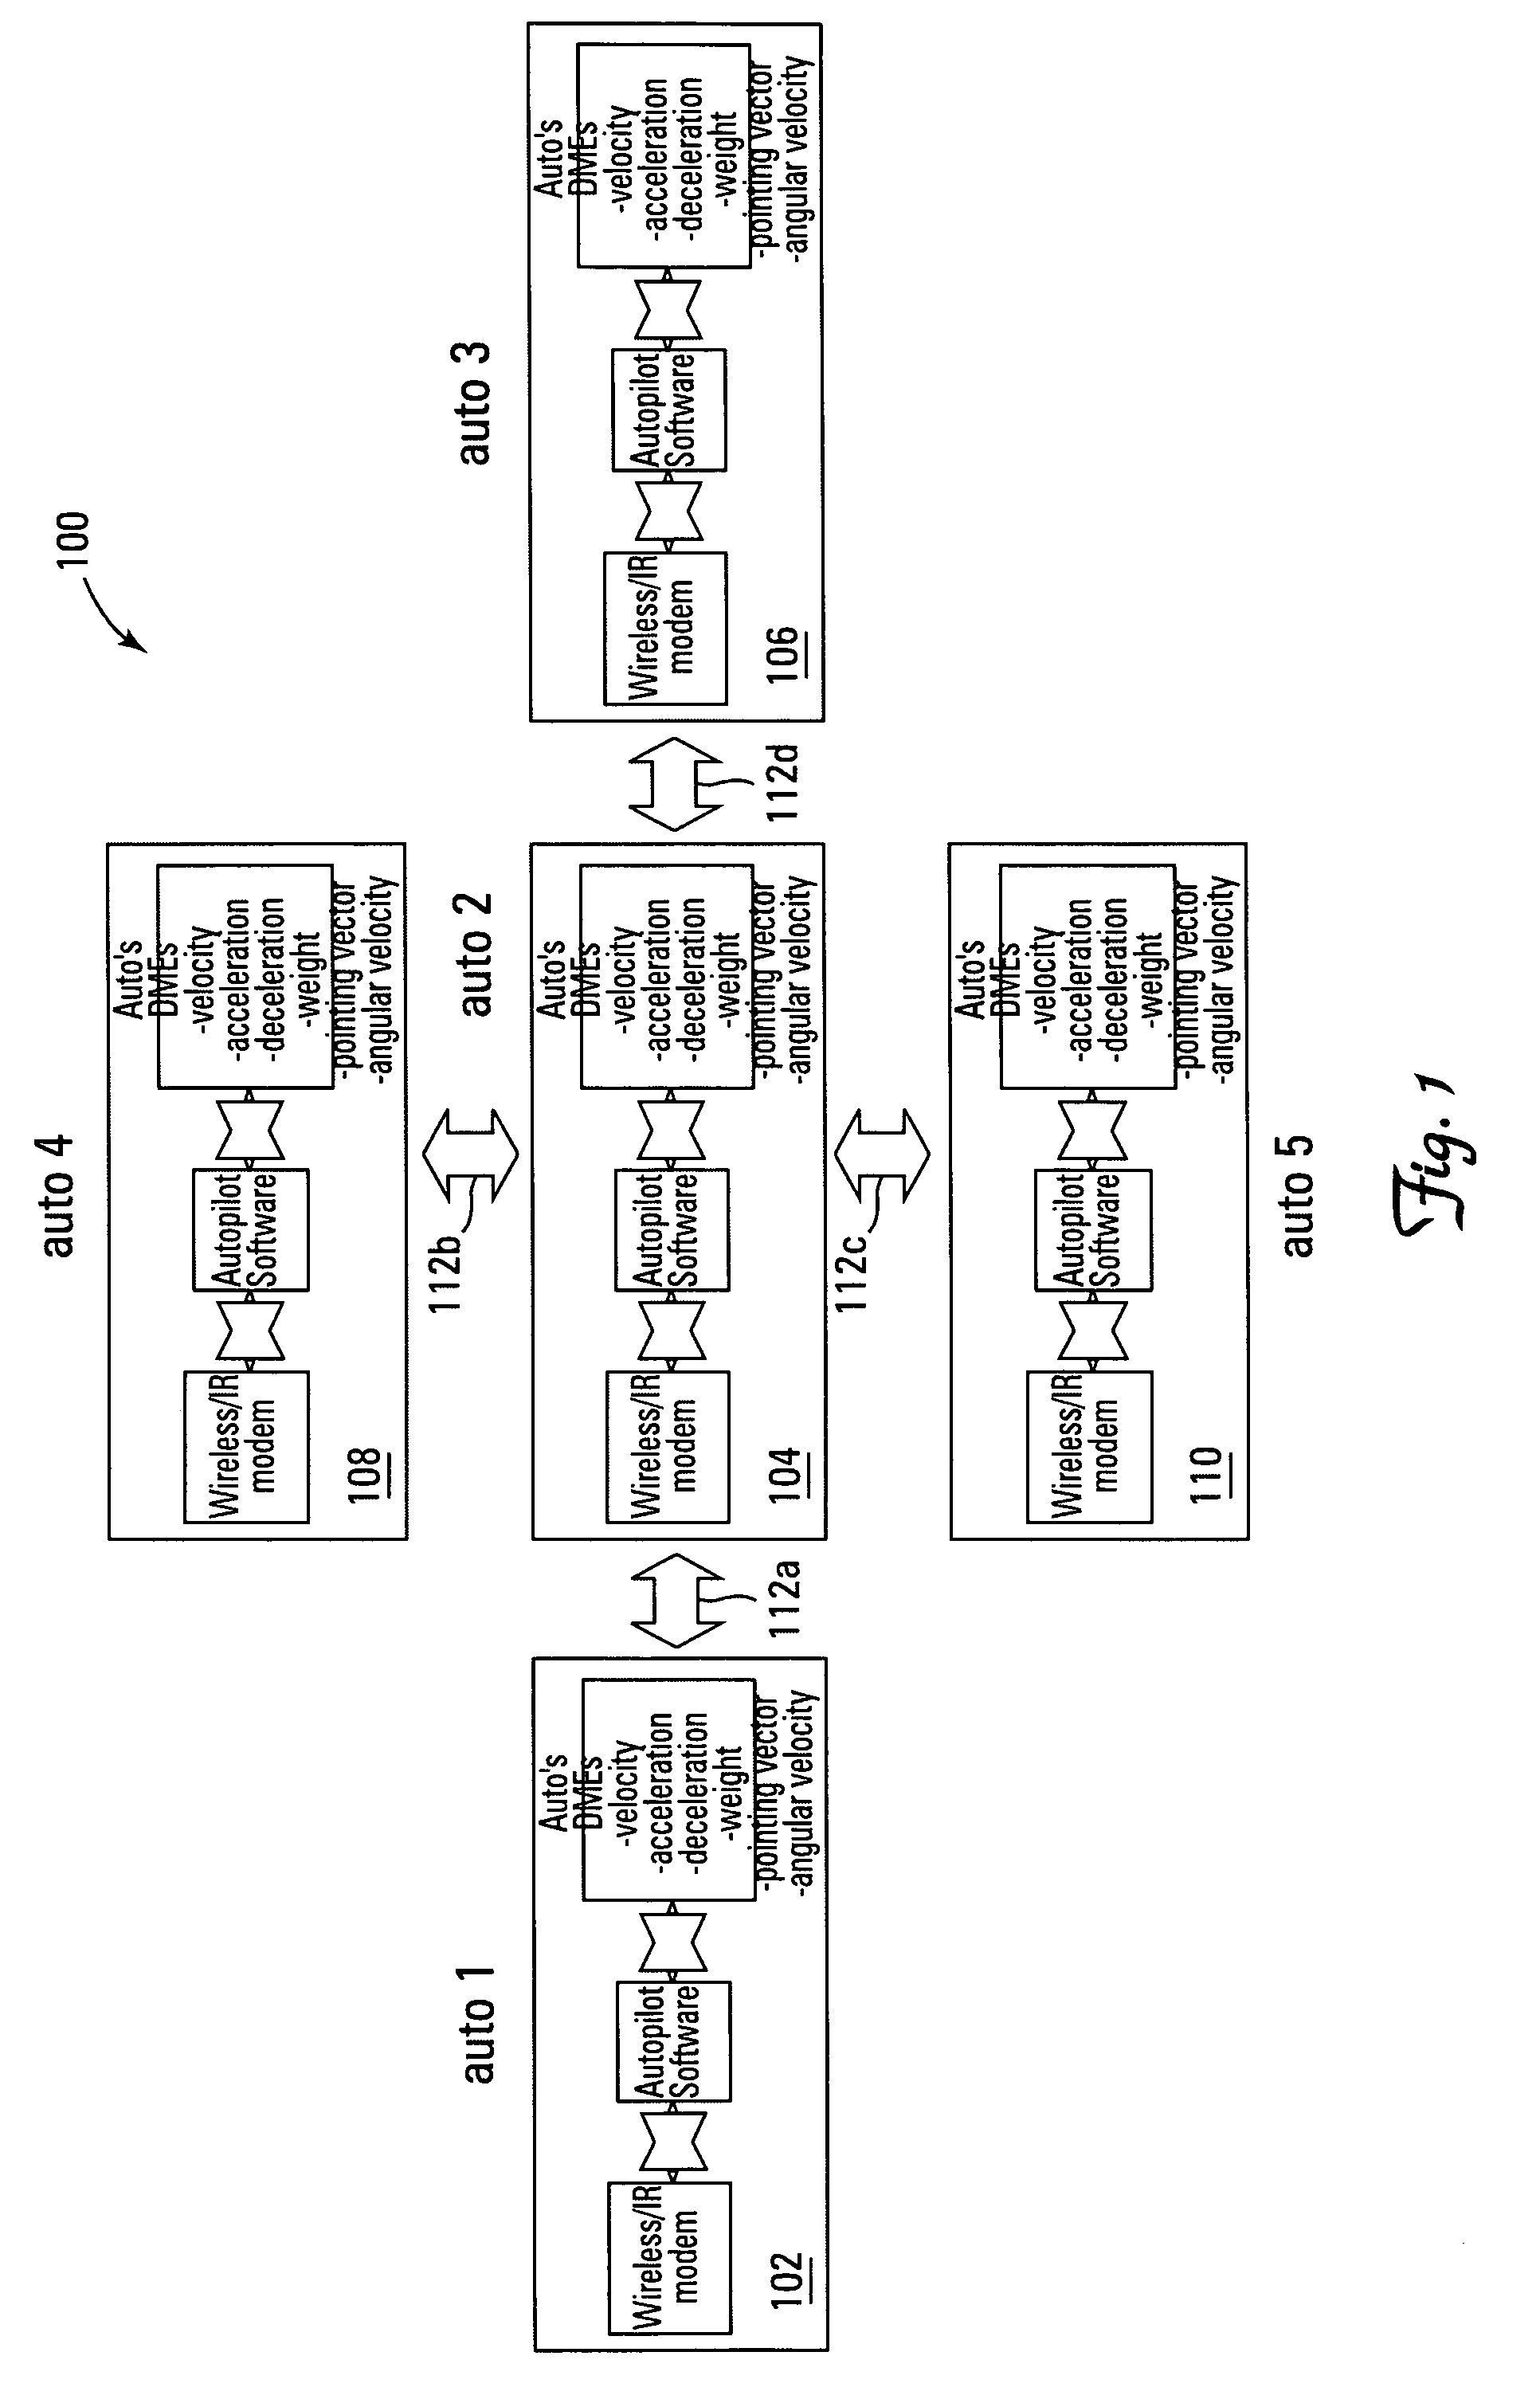 System and method for controlling vehicular traffic flow